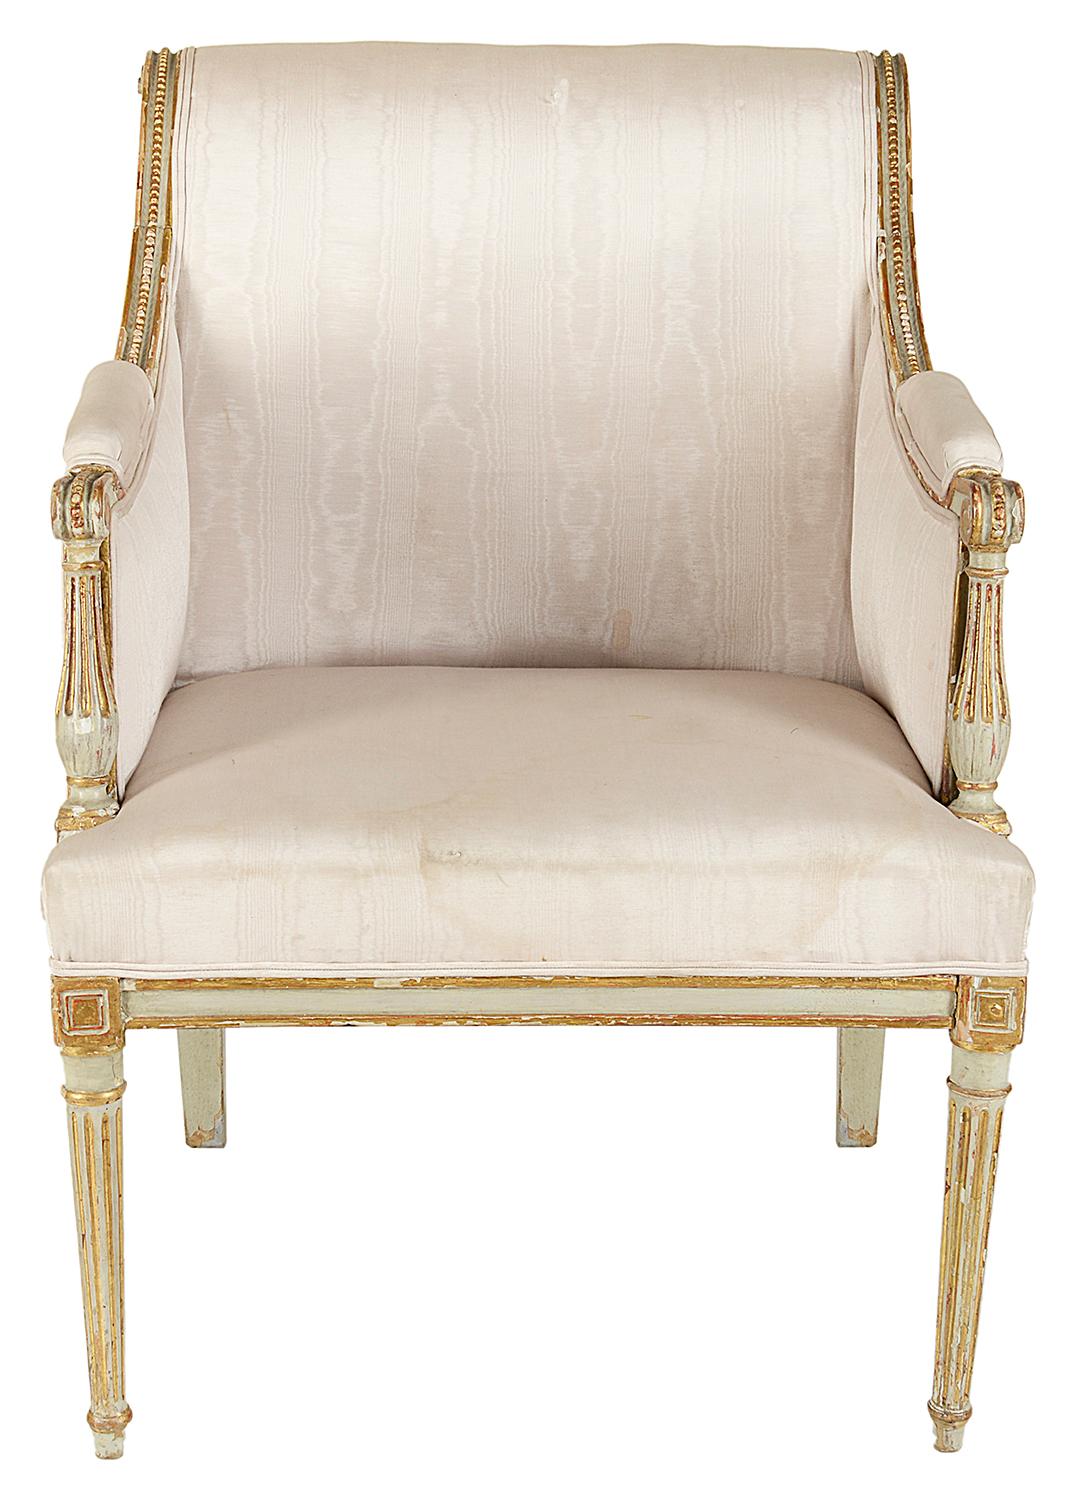 A very stylish late 18th-early 19th century French Louis XVI style Ivory colored Bergere armchair. Having reeded and fluted, gilded decoration and raised on turned tapering legs.